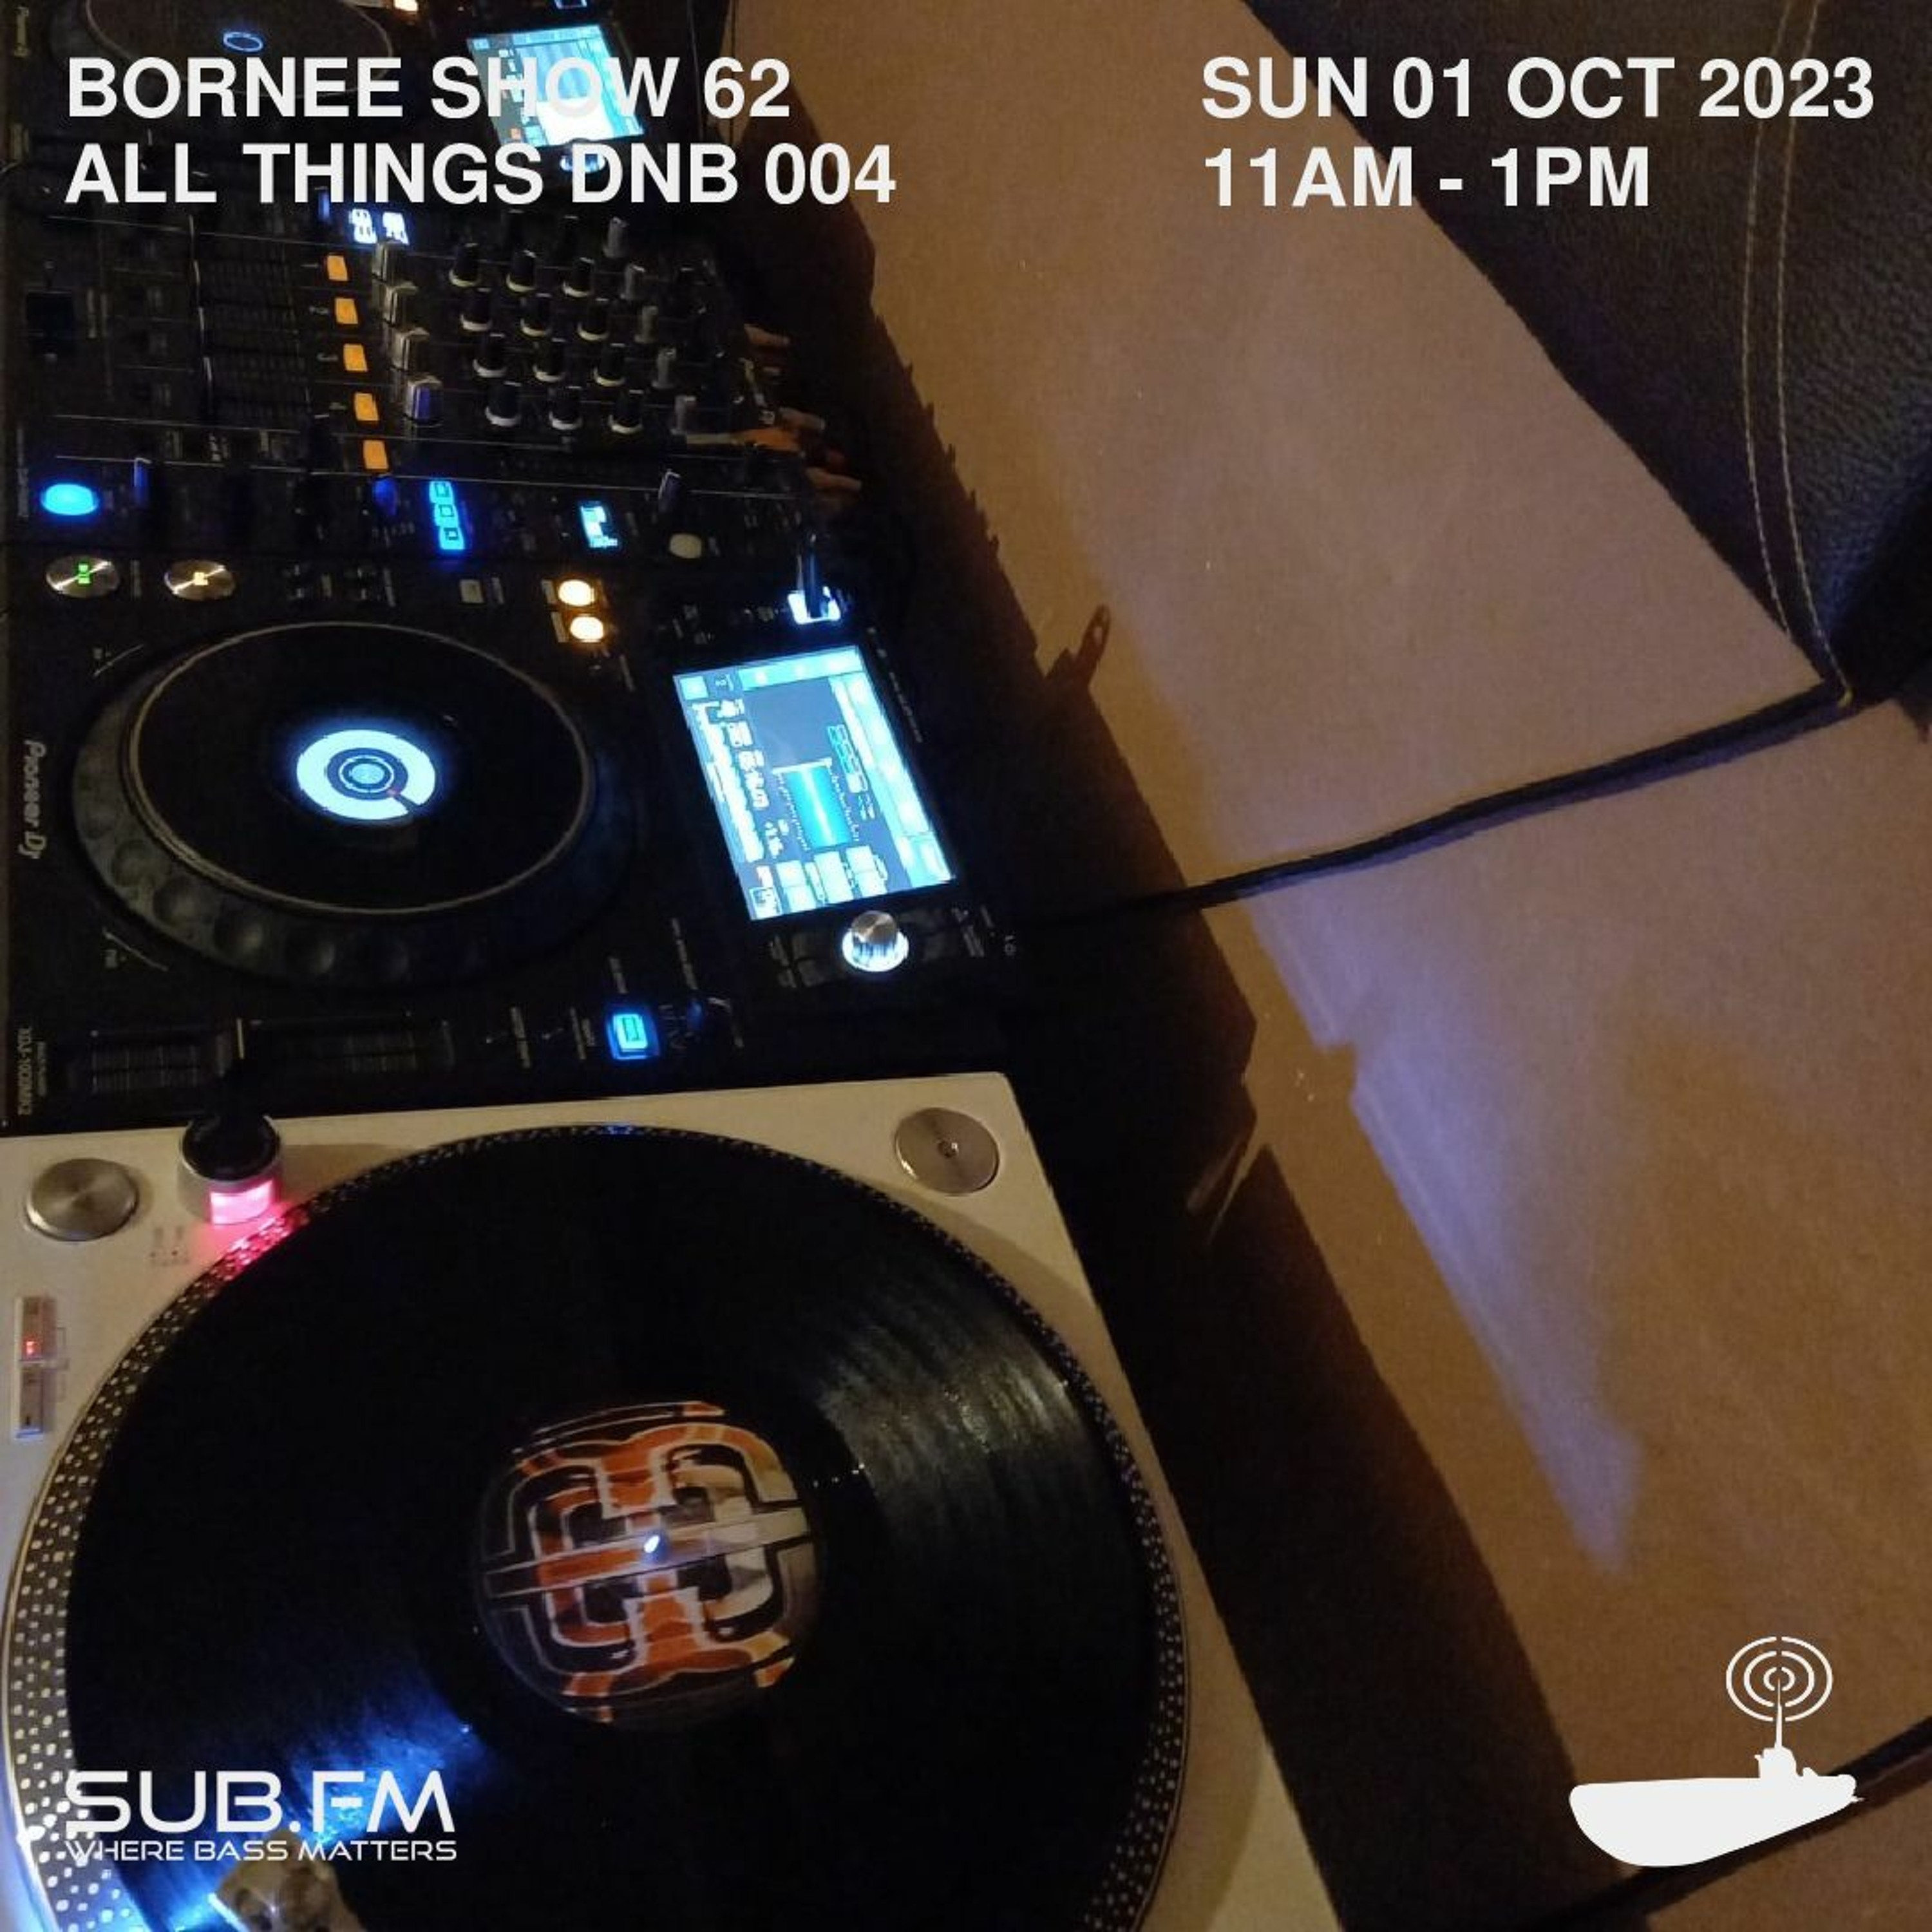 Bornee Show 62 All things DnB 004 - 01 Oct 2023